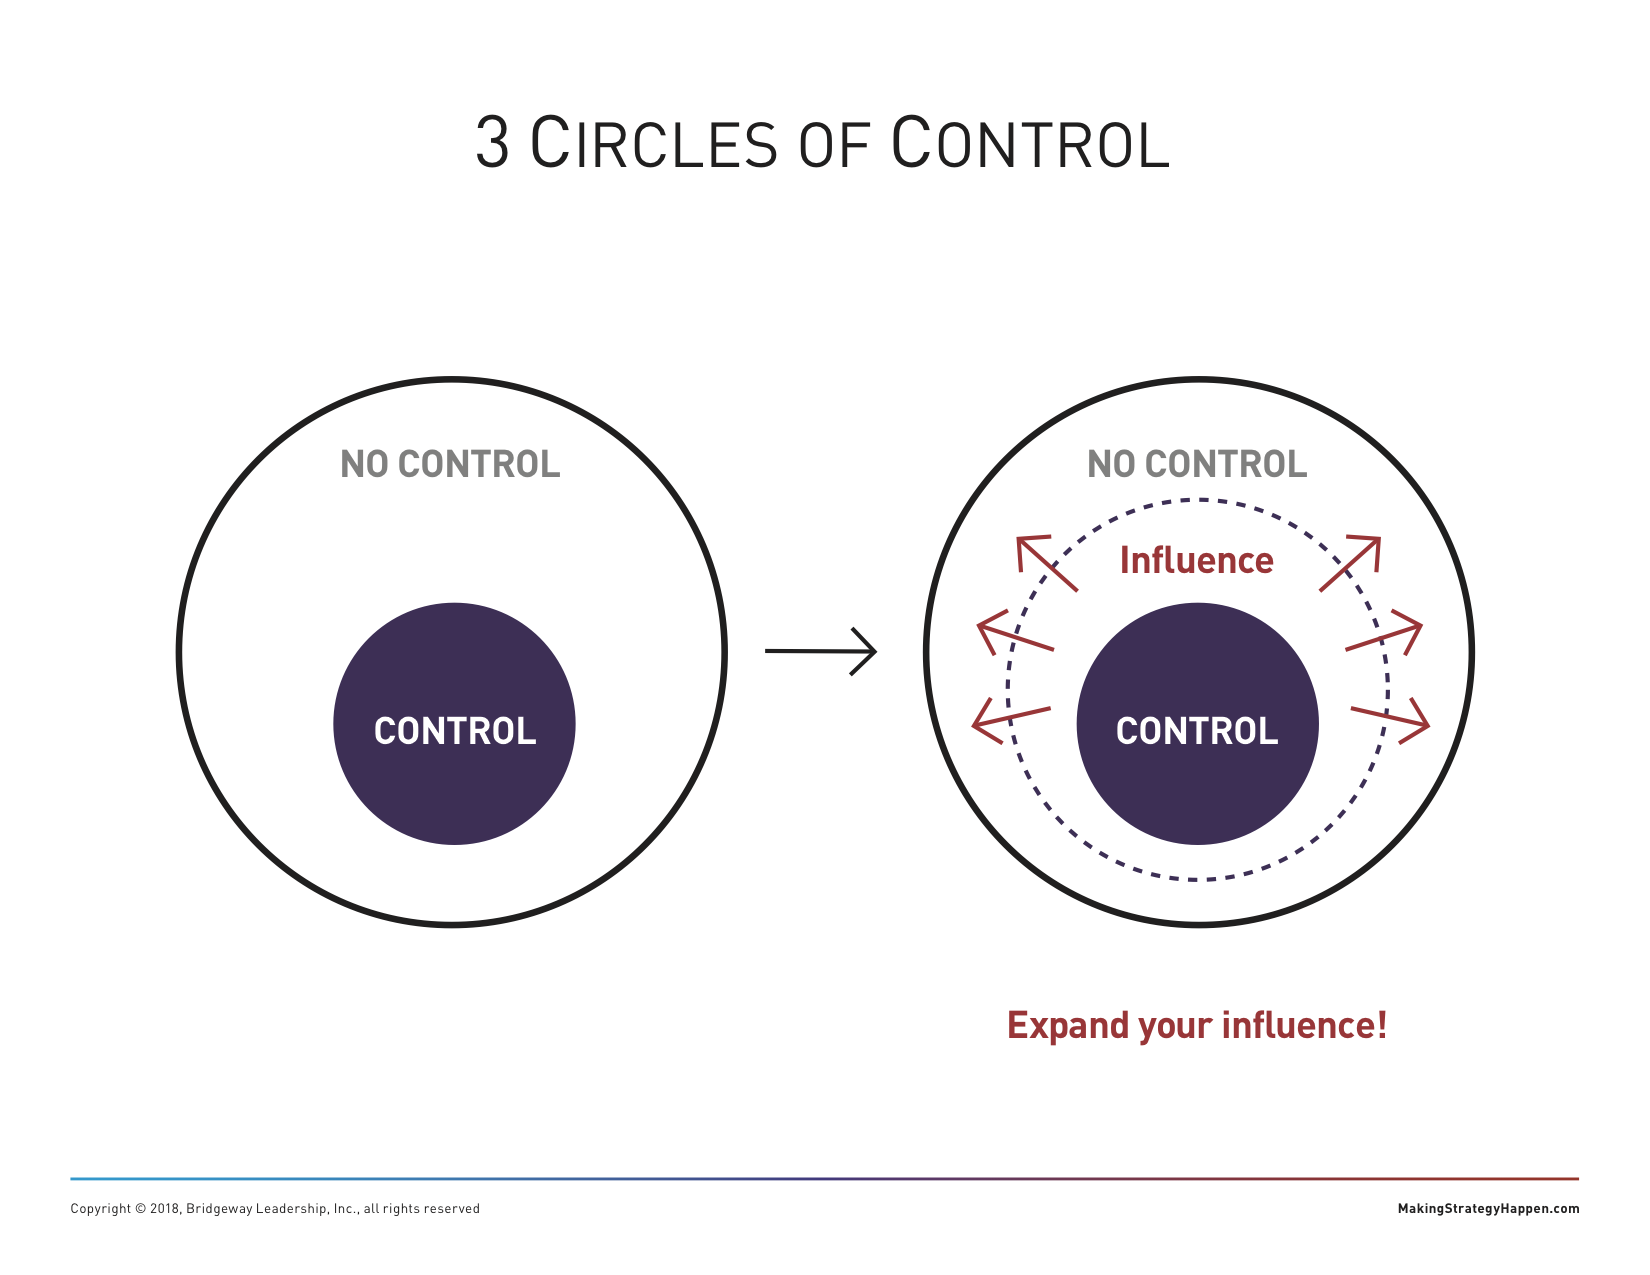 3-circles-of-control-making-strategy-happen